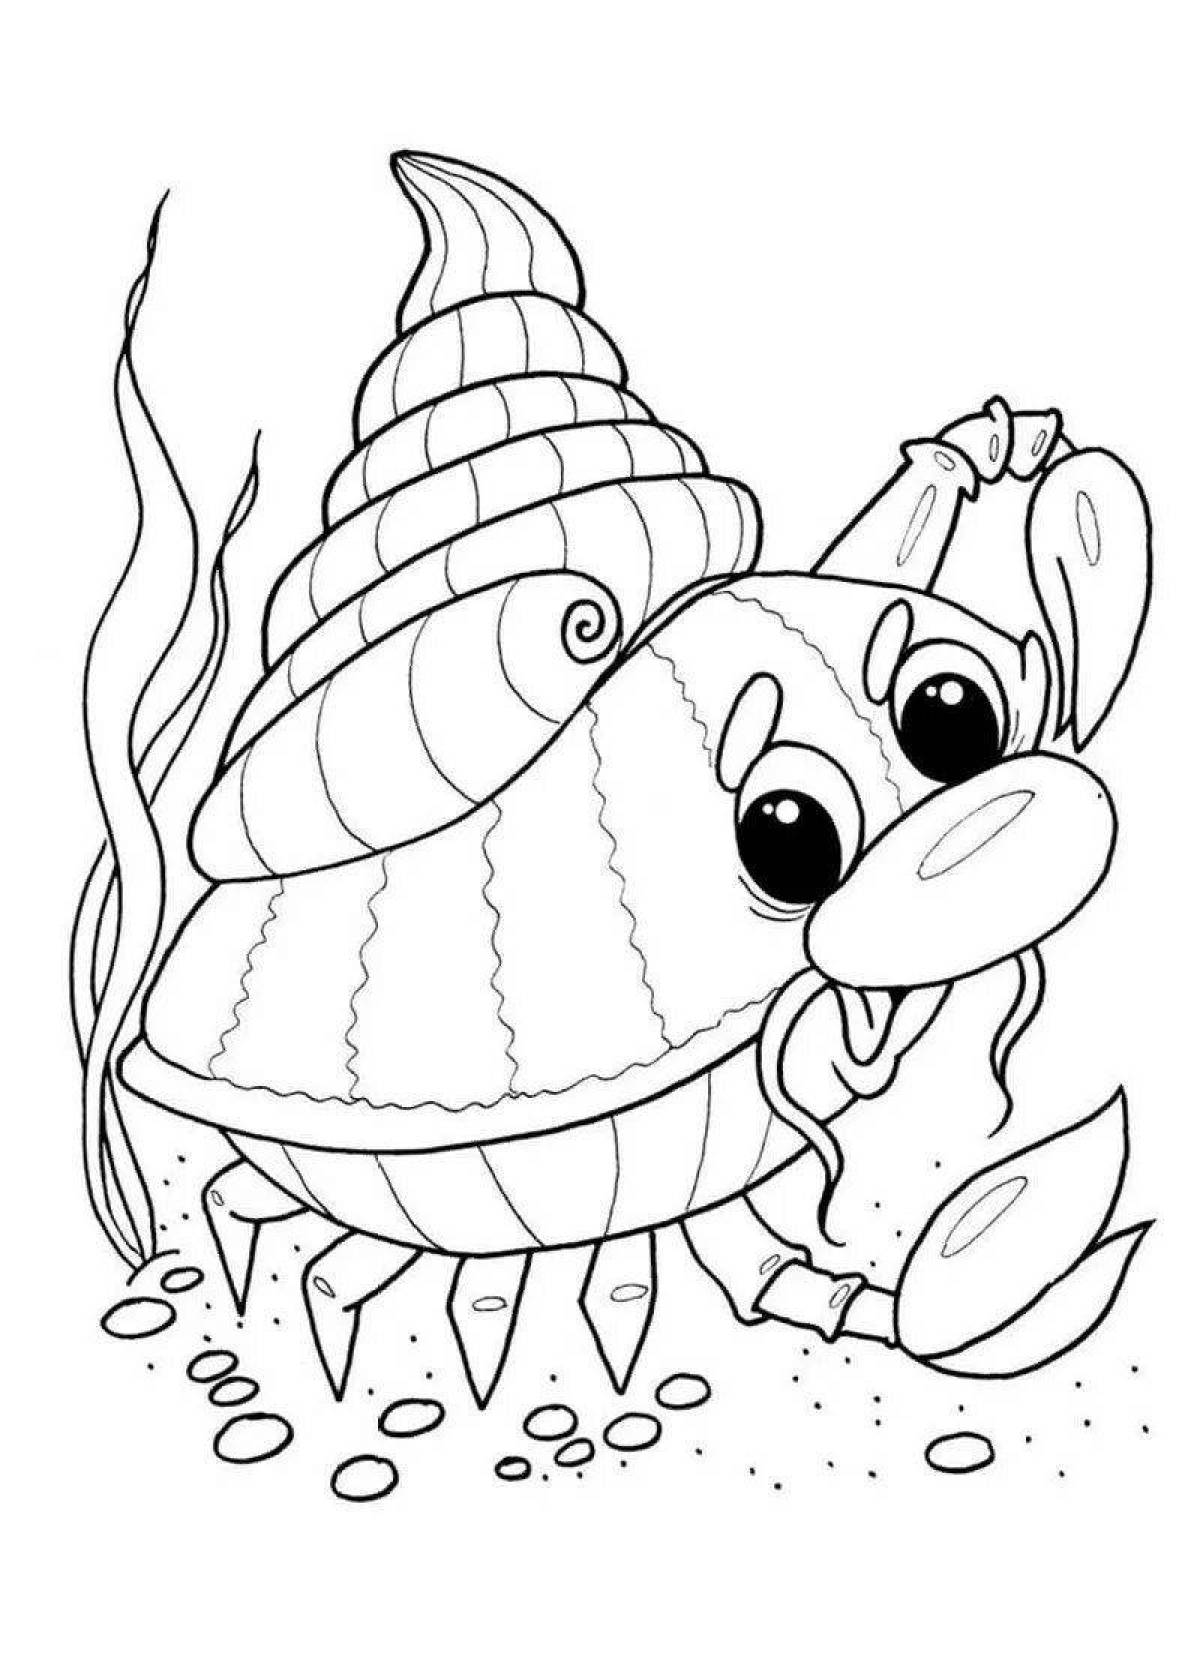 Cute sea life coloring pages